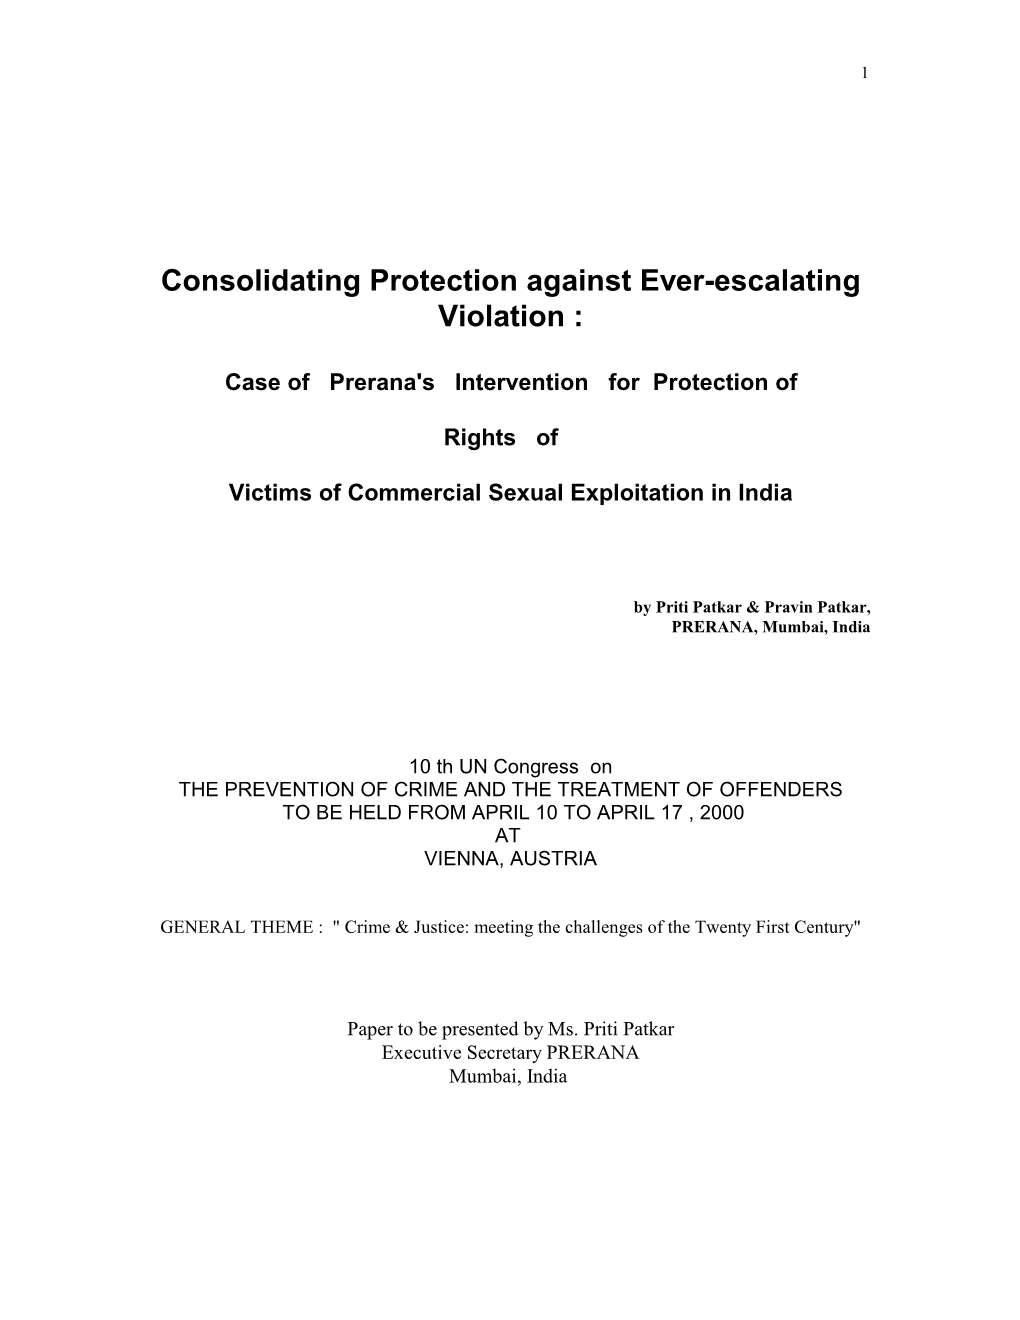 Consolidating Protection Against Ever-Escalating Violation